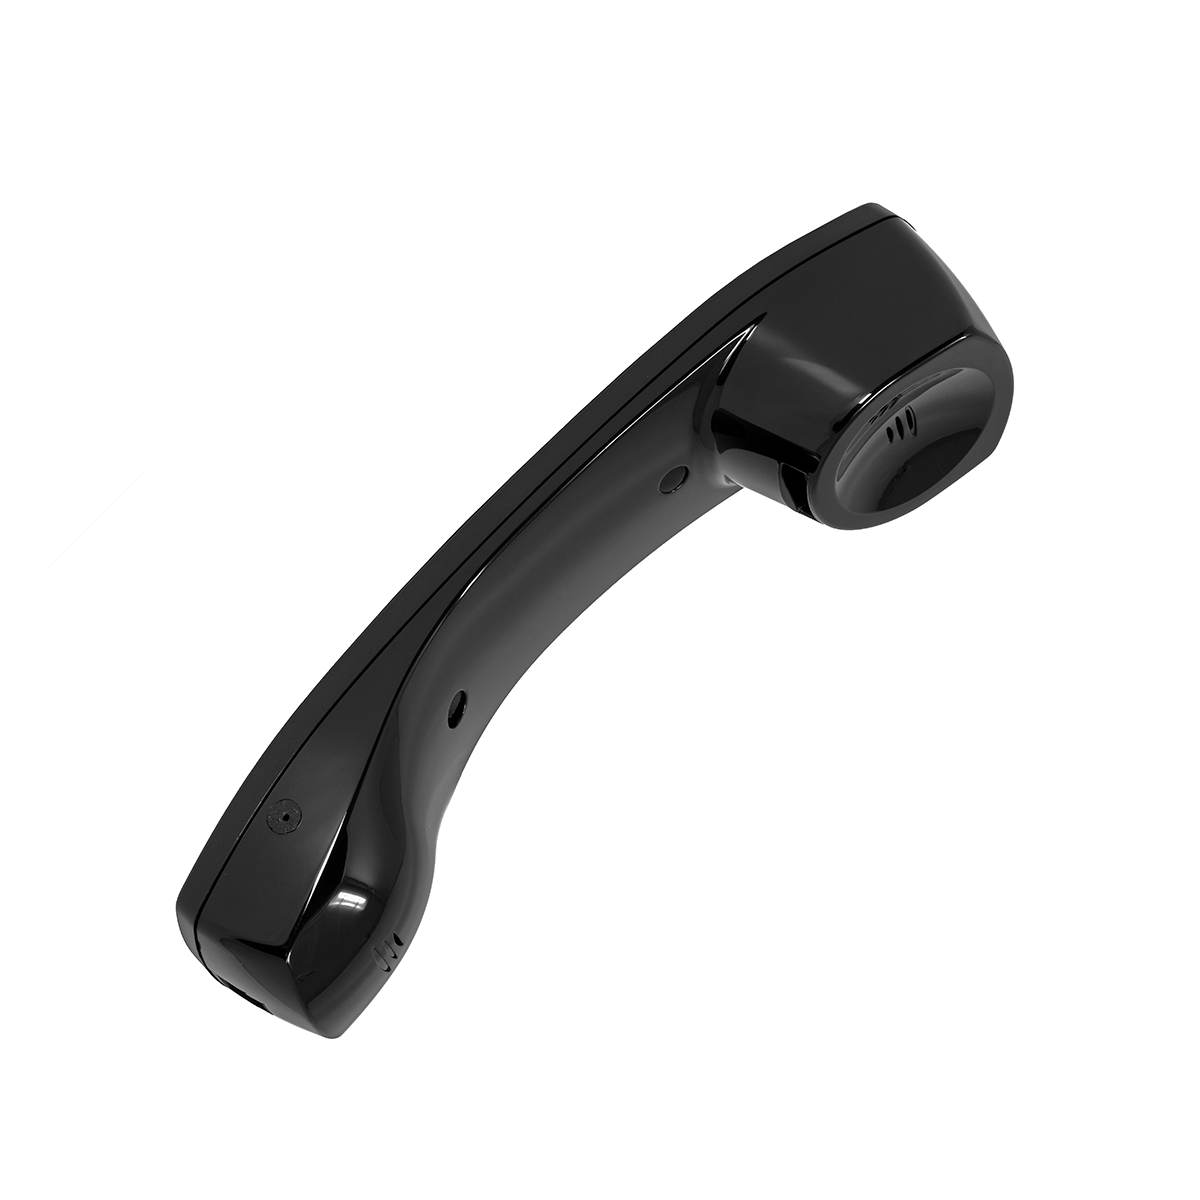 Noise-Cancelling Handset (Left Side View)